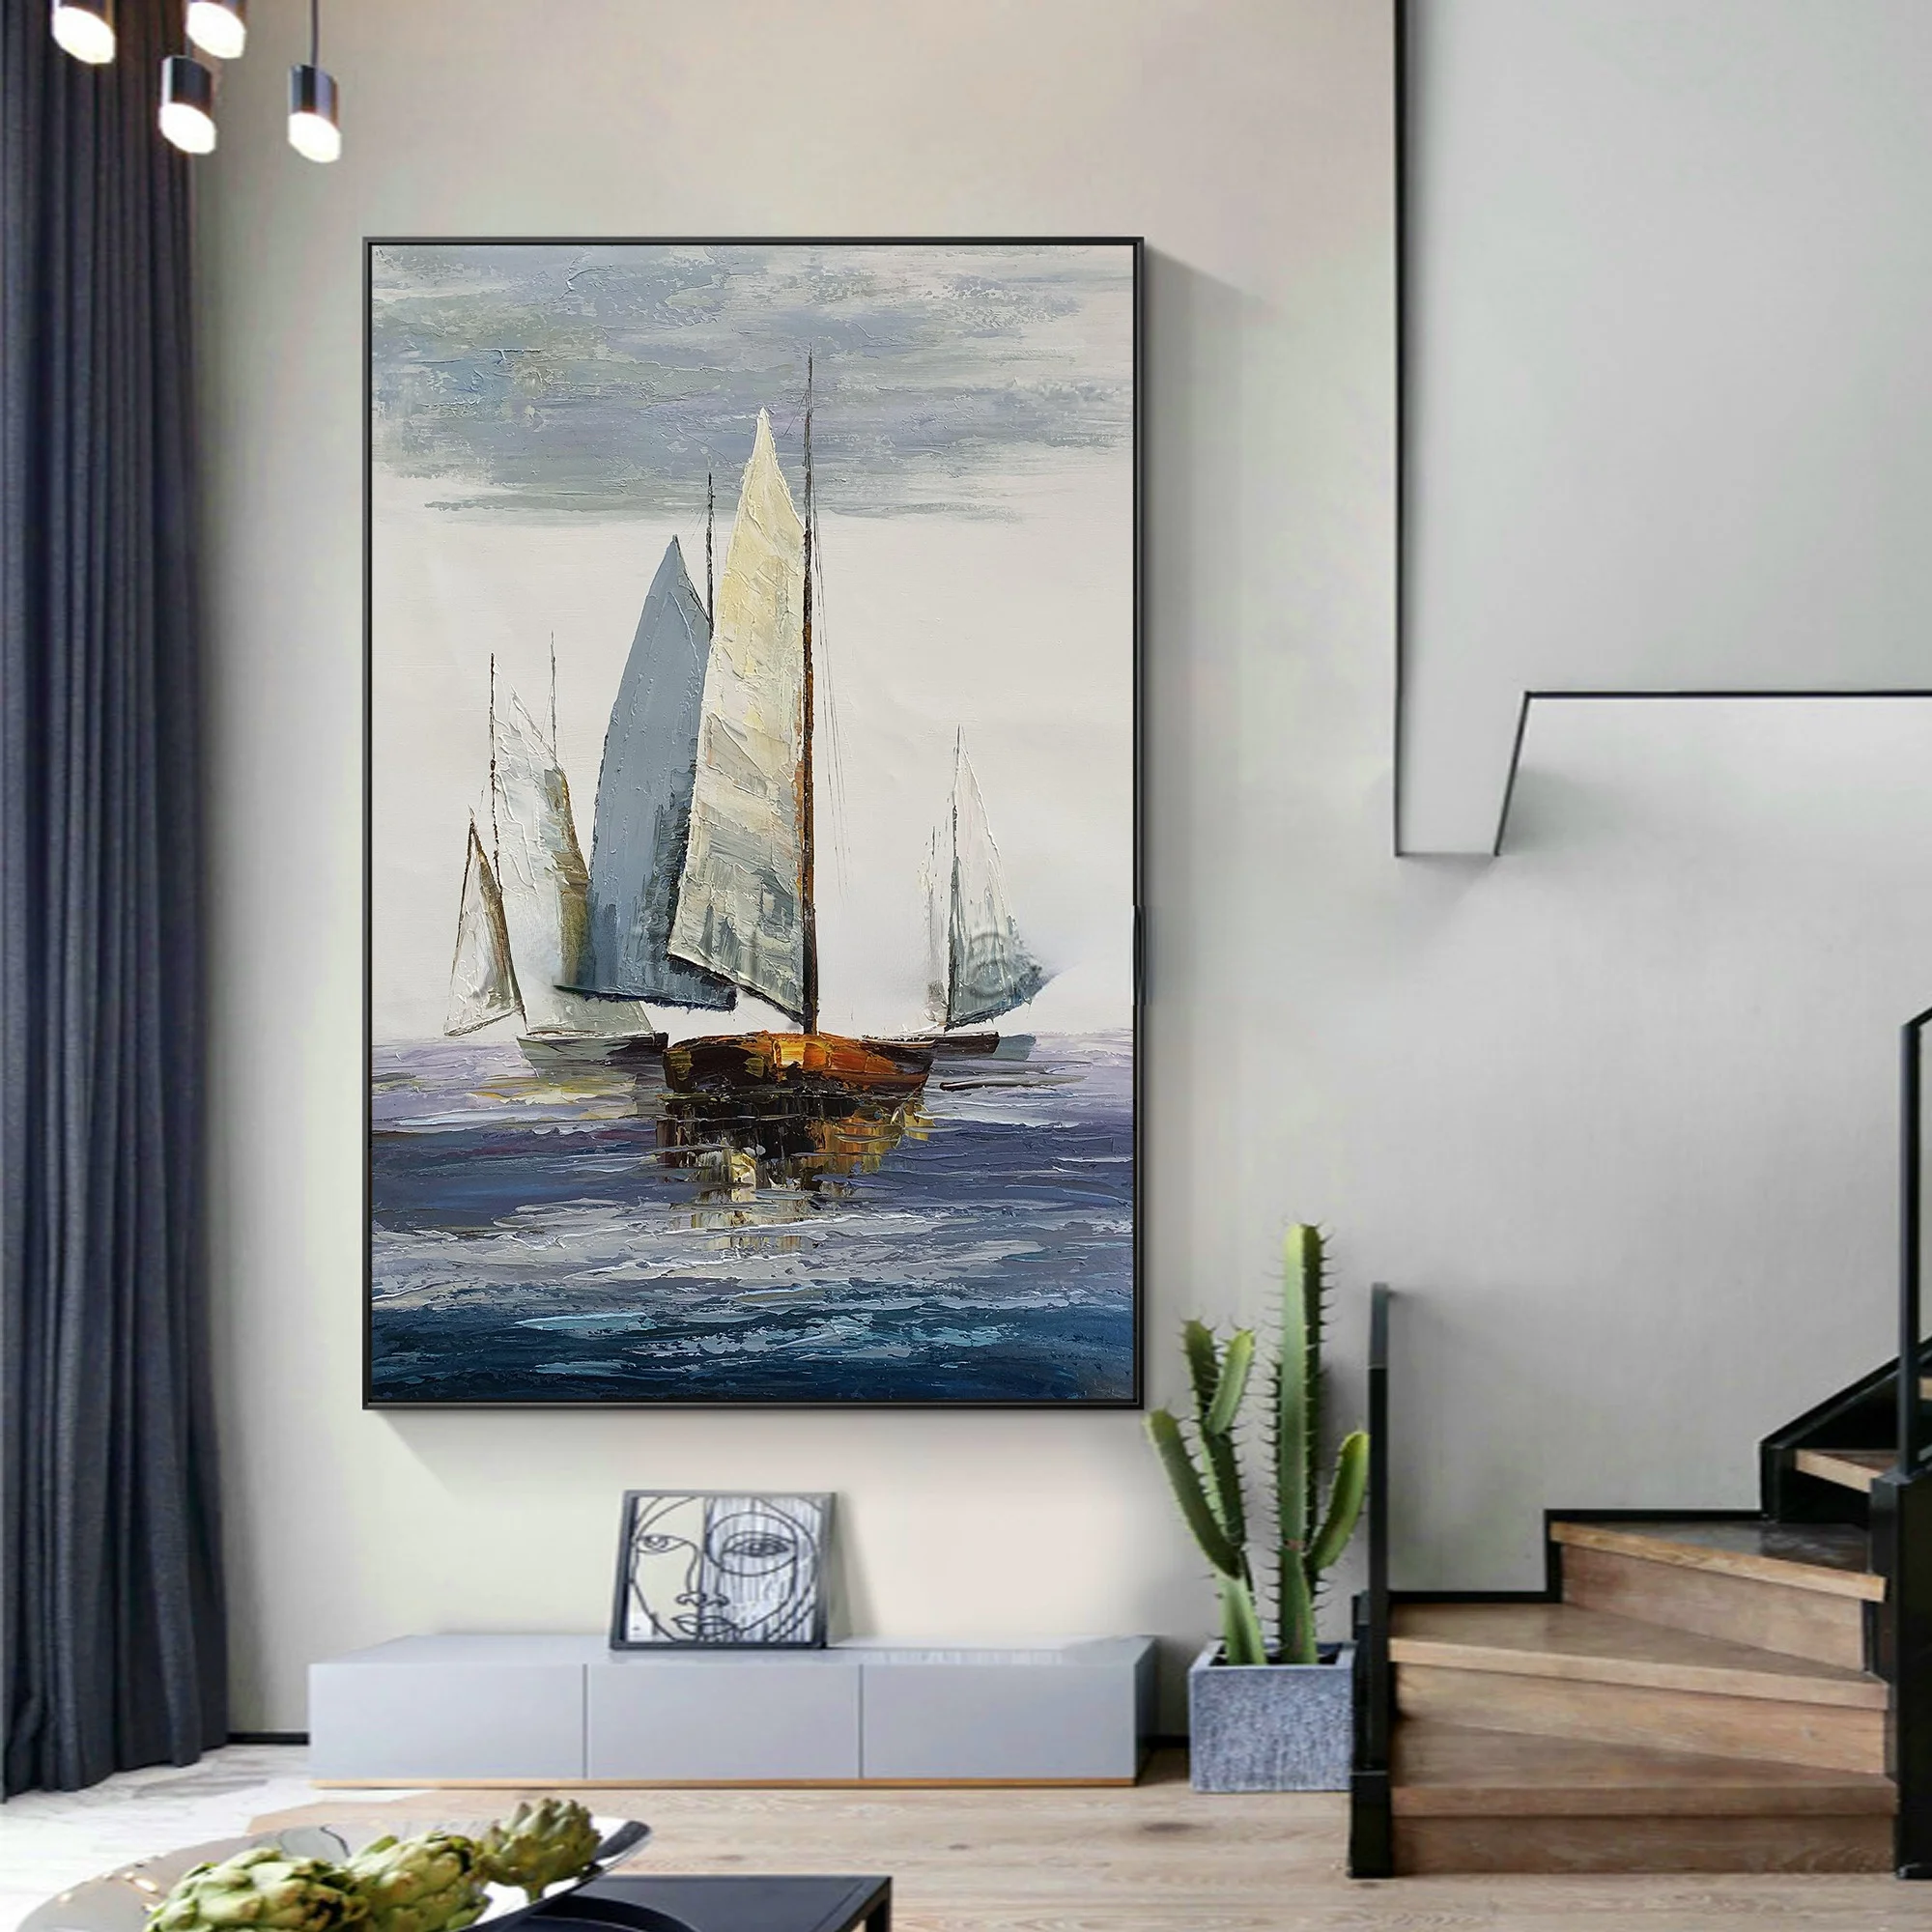 

No Framed Hand Painted Oil Painting On Canvas Room Decoracion Sailing Boat Ship Yacht 1 Wall Art Pictures For Home Room Seascape